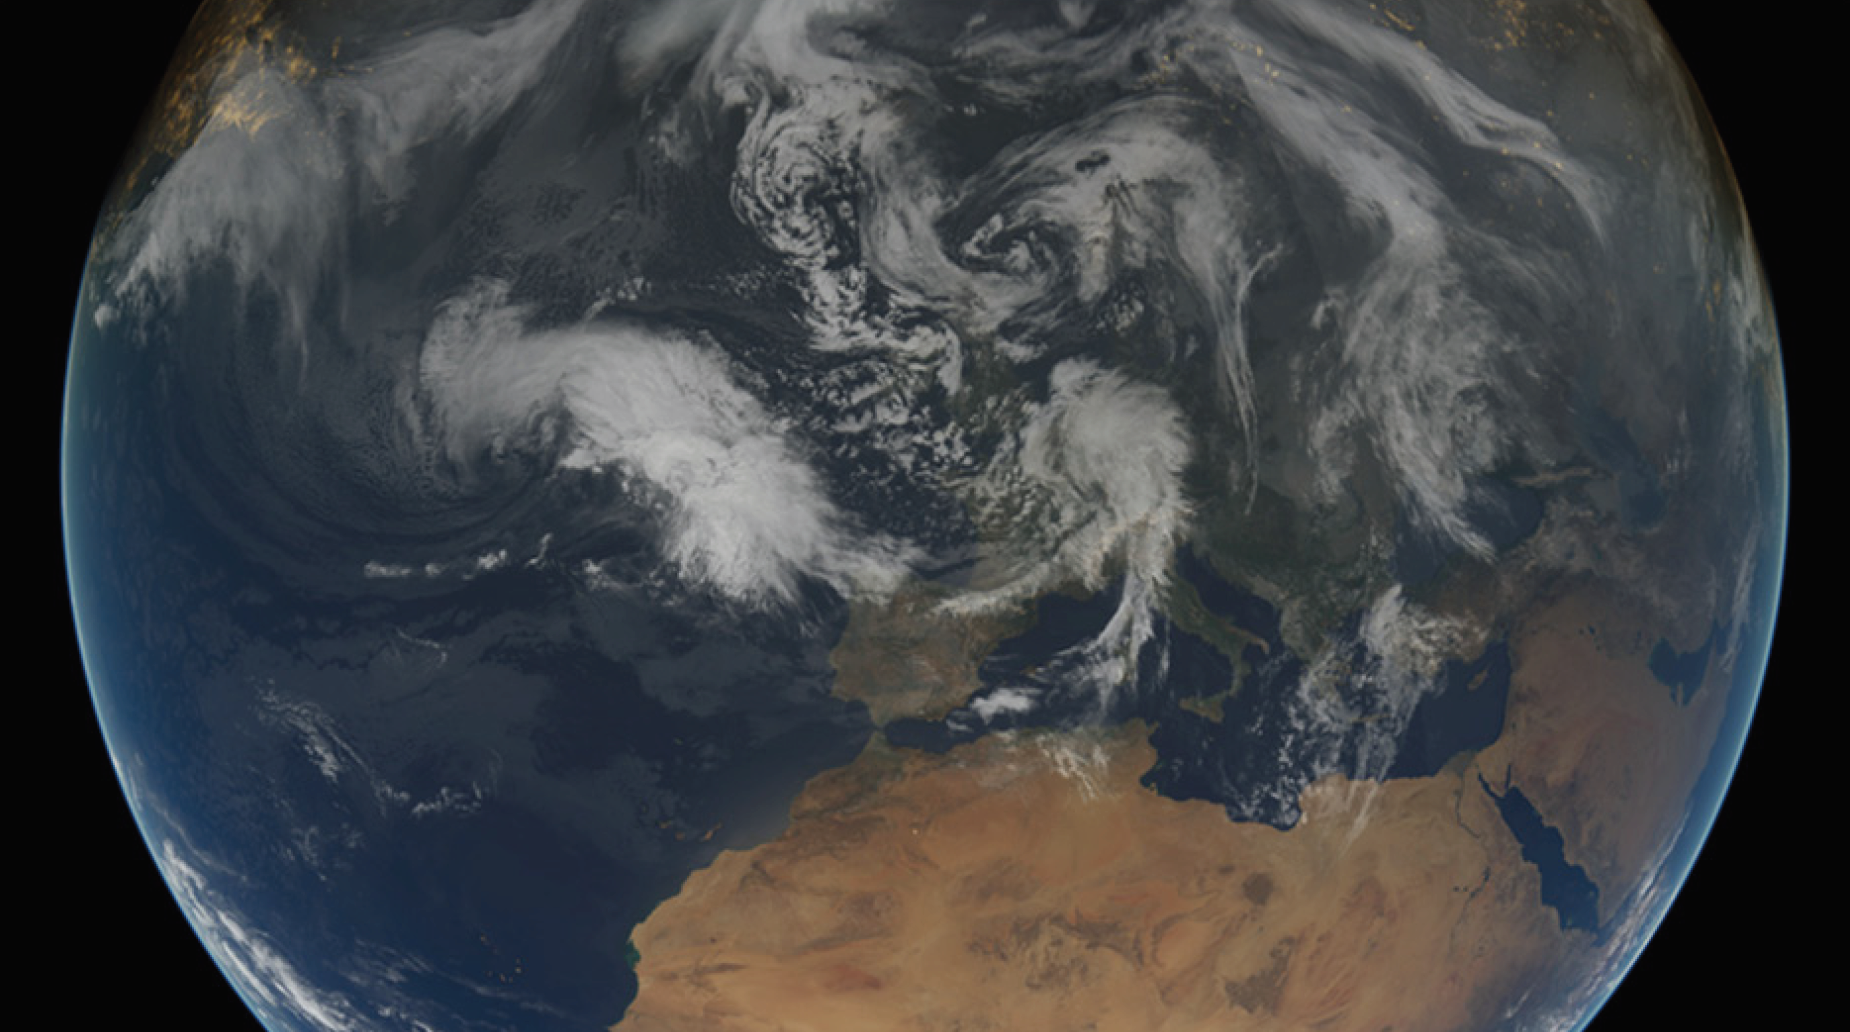 This composite image shows the weather situation over Europe at 12:00 UTC on 13 February 2014. The image is composed of infrared imagery from the geostationary satellites of EUMETSAT and NOAA, overlaid on NASA’s Blue Marble land imagery.